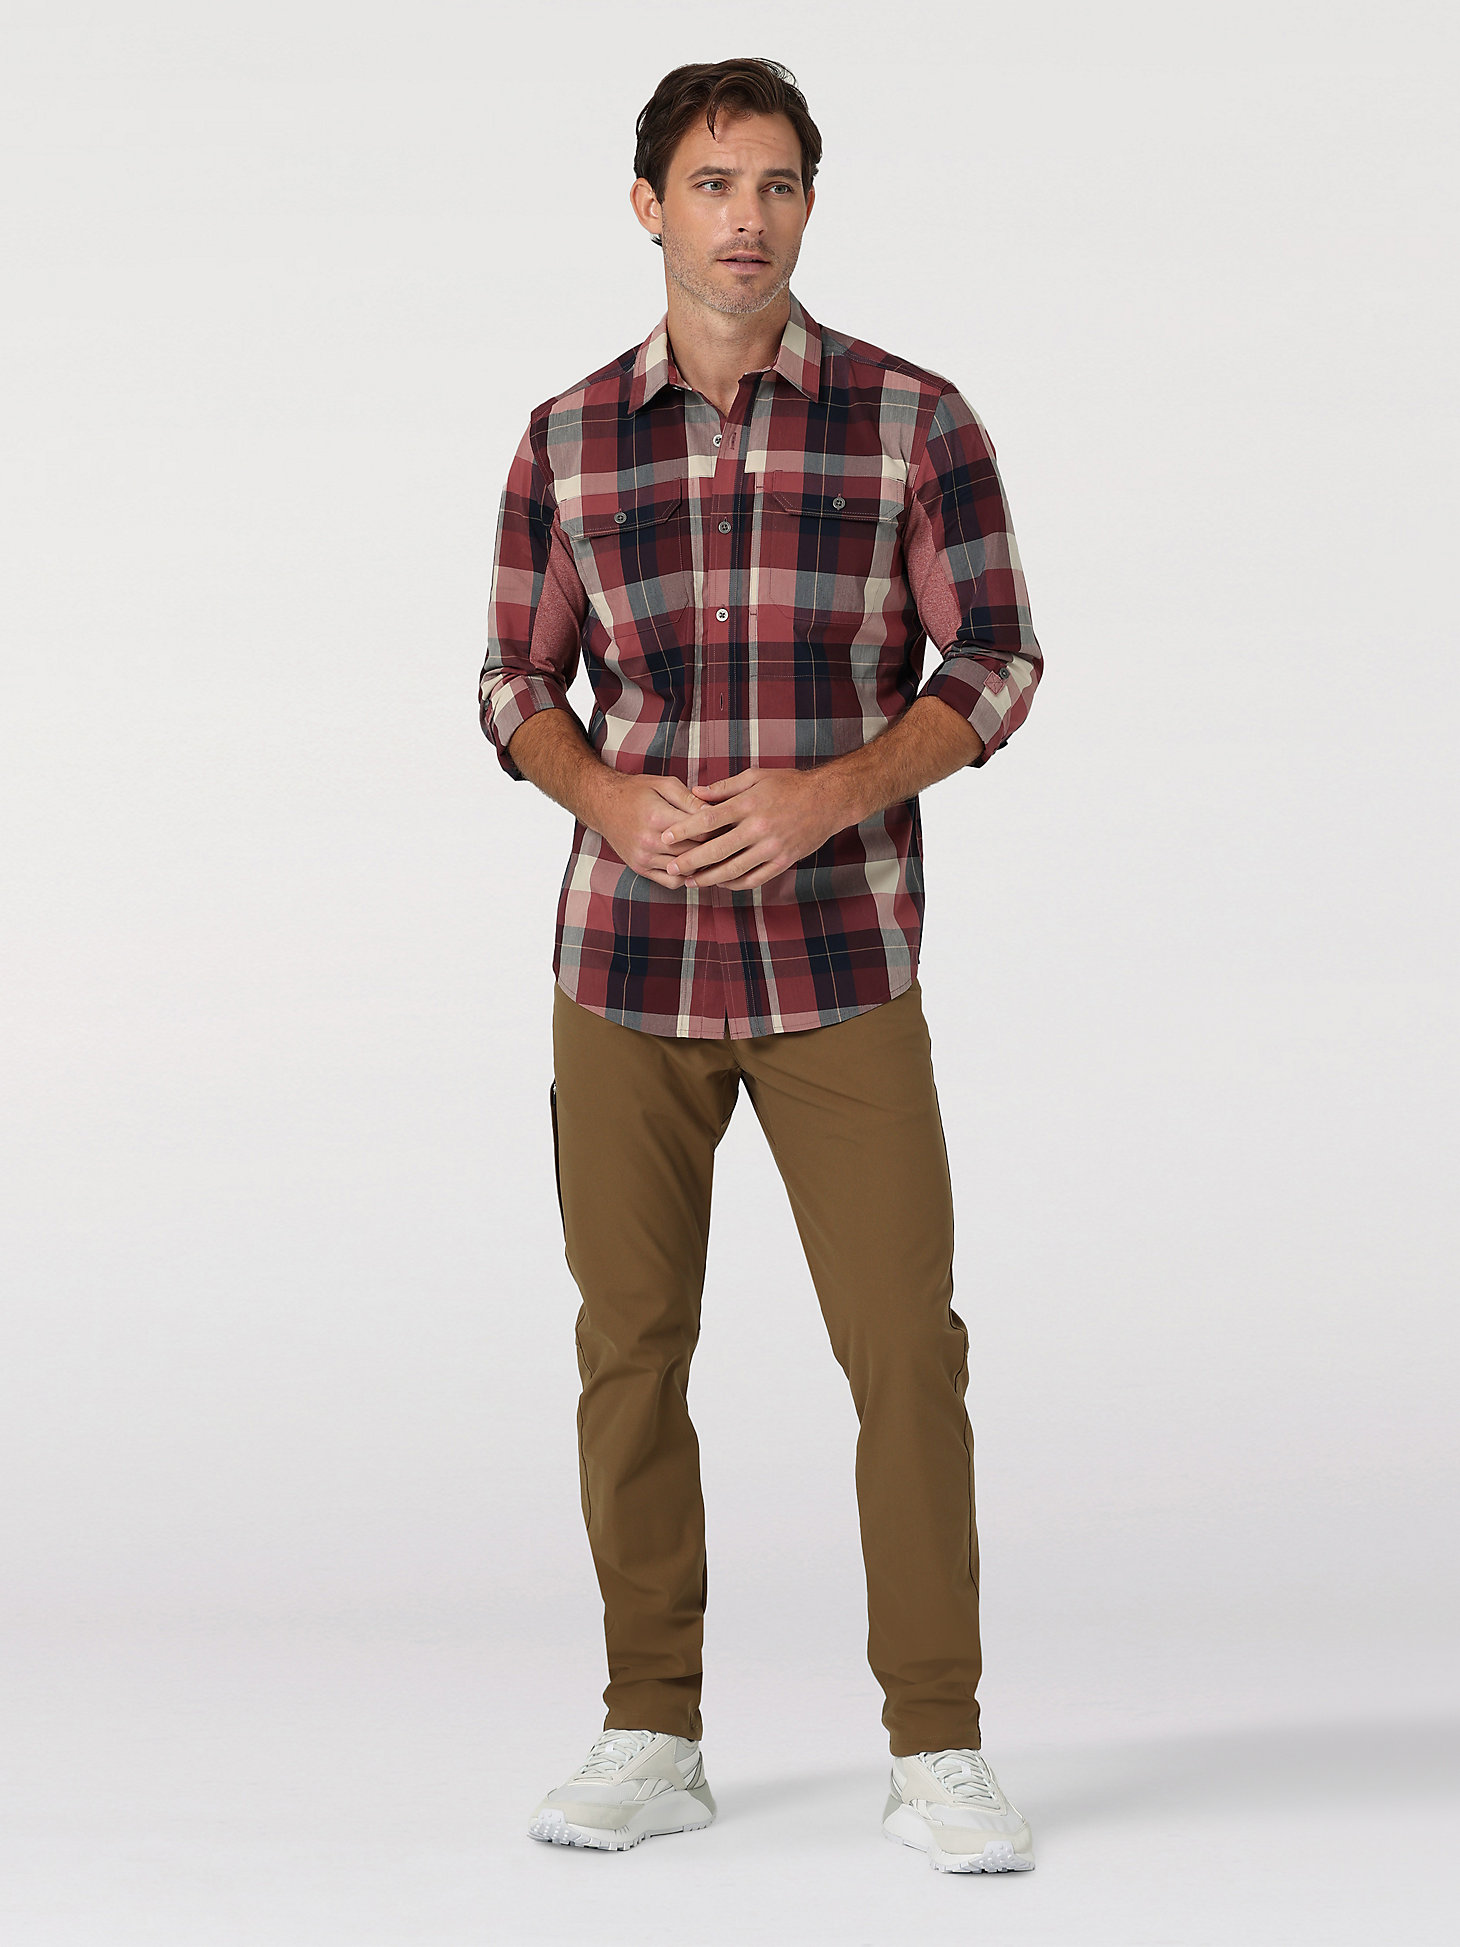 ATG By Wrangler™ Plaid Mixed Material Shirt in Beagle Apple Butter alternative view 10